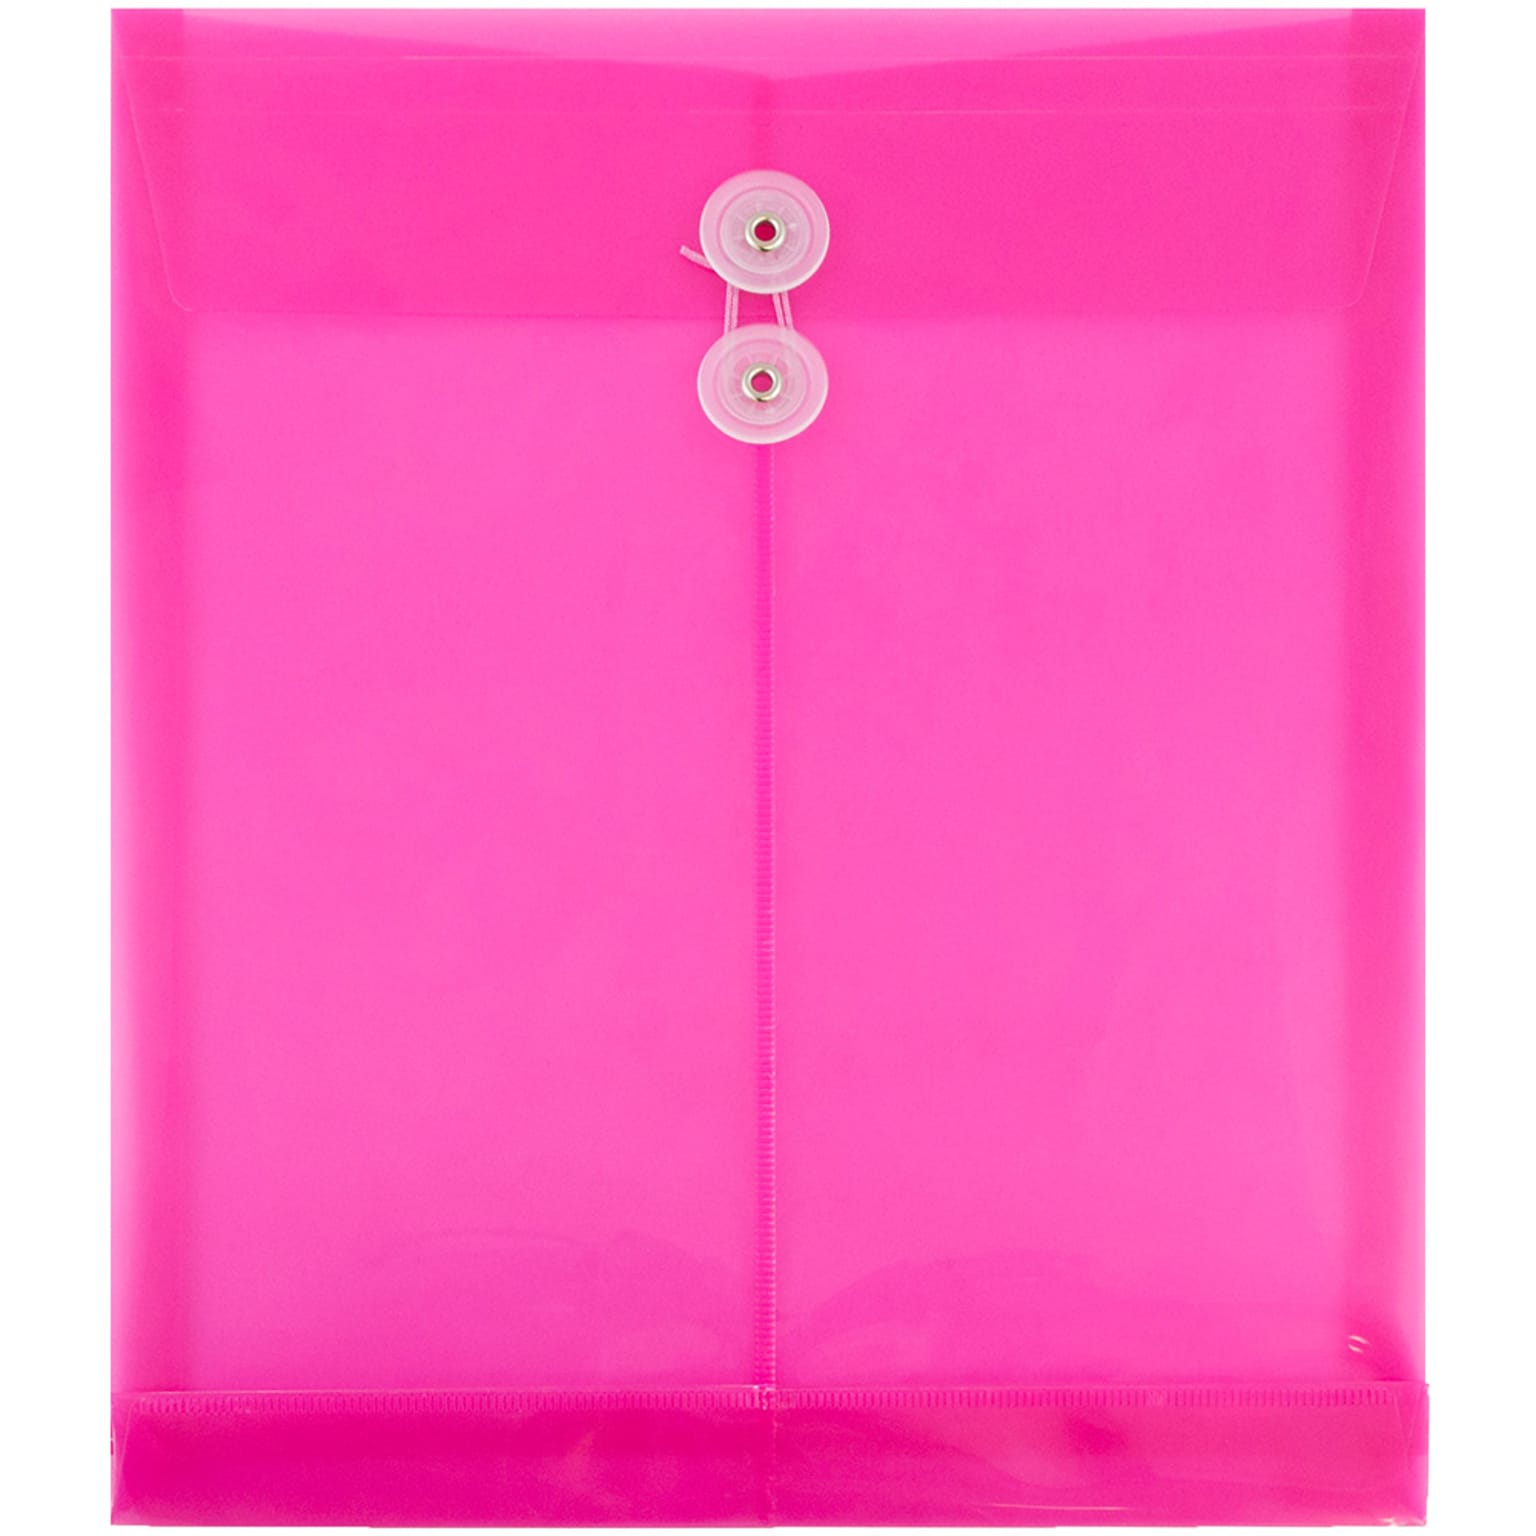 JAM Paper® Plastic Envelopes with Button and String Tie Closure, Letter Open End, 9.75 x 11.75, Fuchsia Pink, 12/Pack (118B1FU)